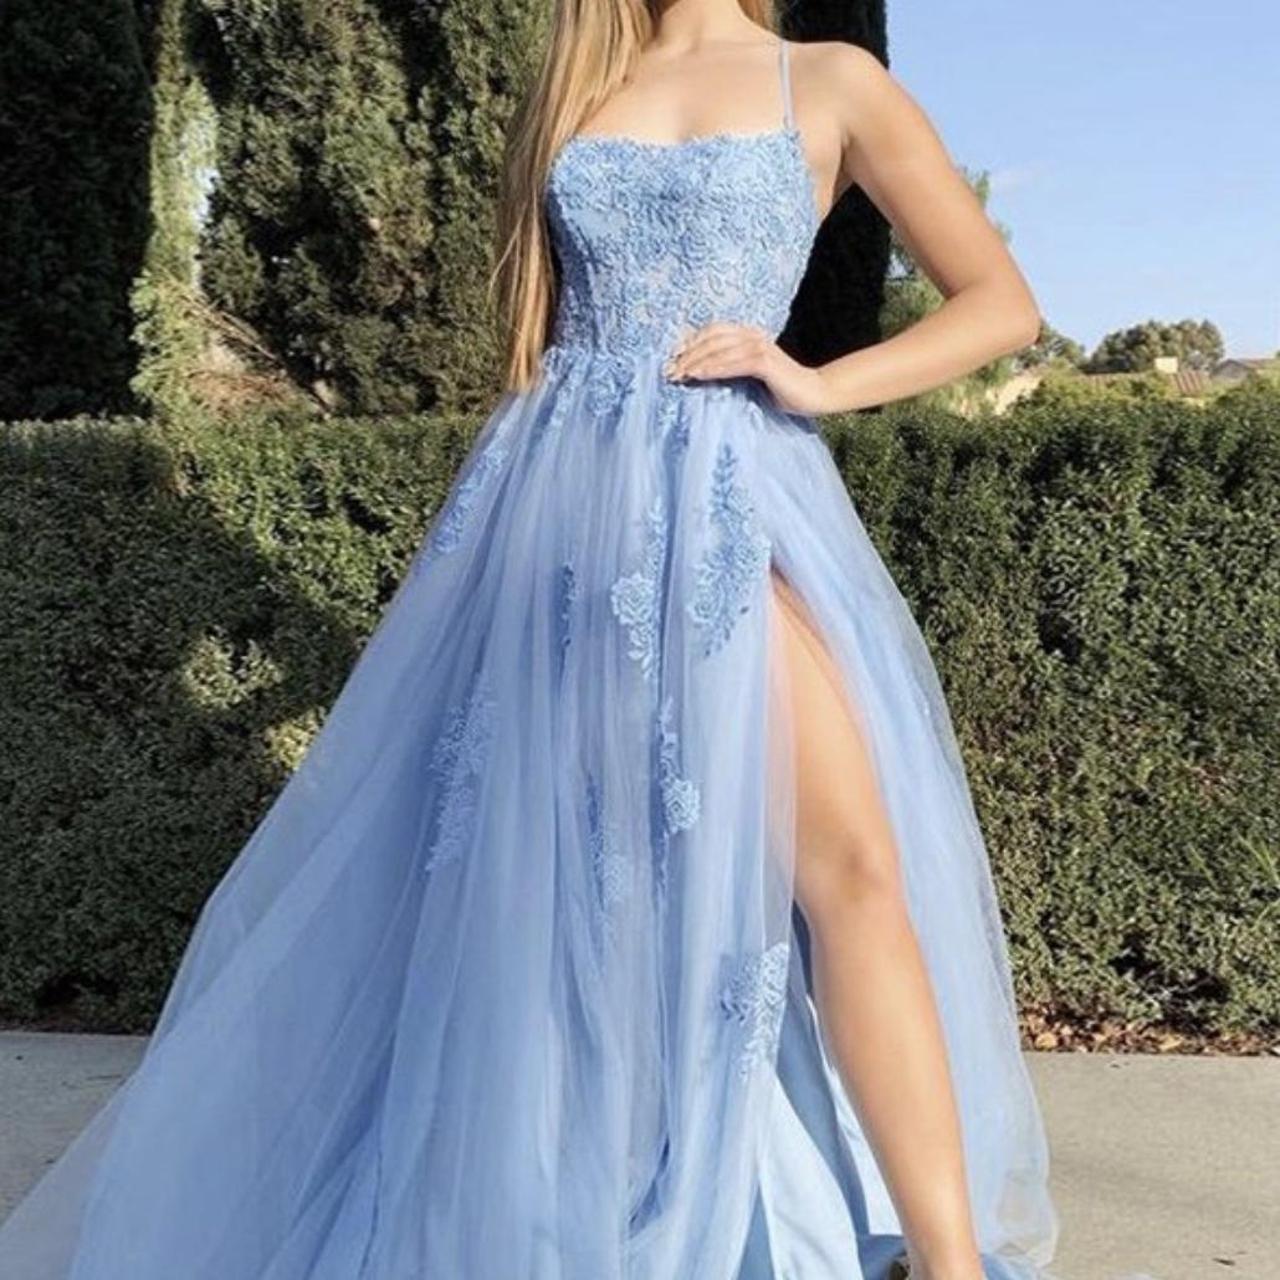 👗 Blue Prom/Ball dress with a corset bodice and high... - Depop